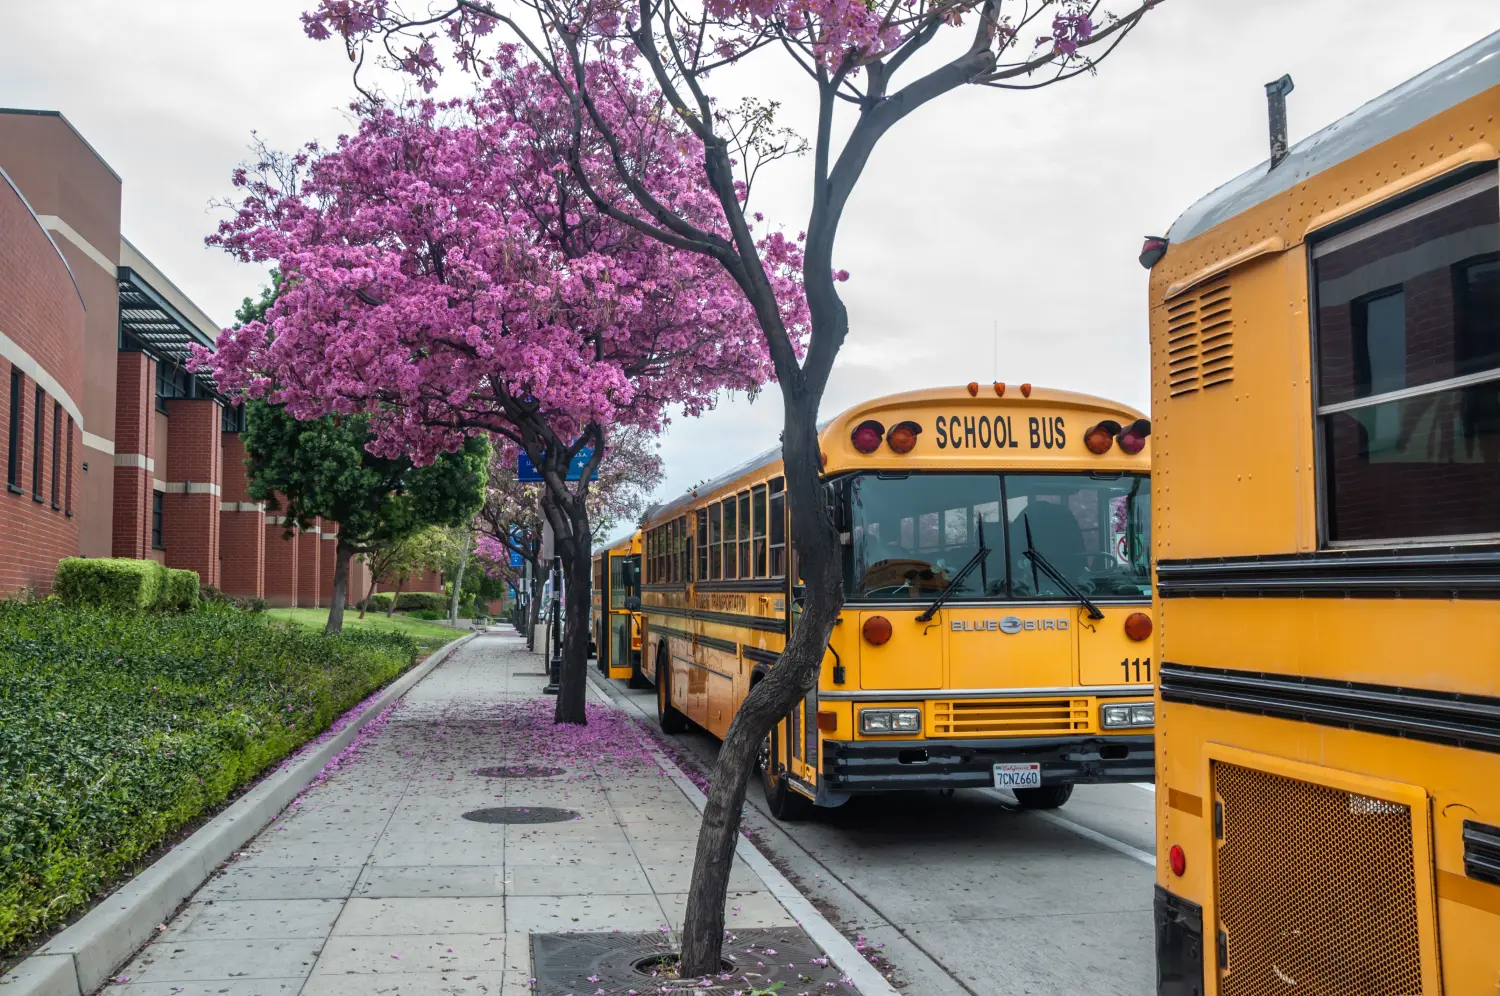 School buses waiting for students in front of Burbank High School. Burbank, California, USA - March 5, 2016.